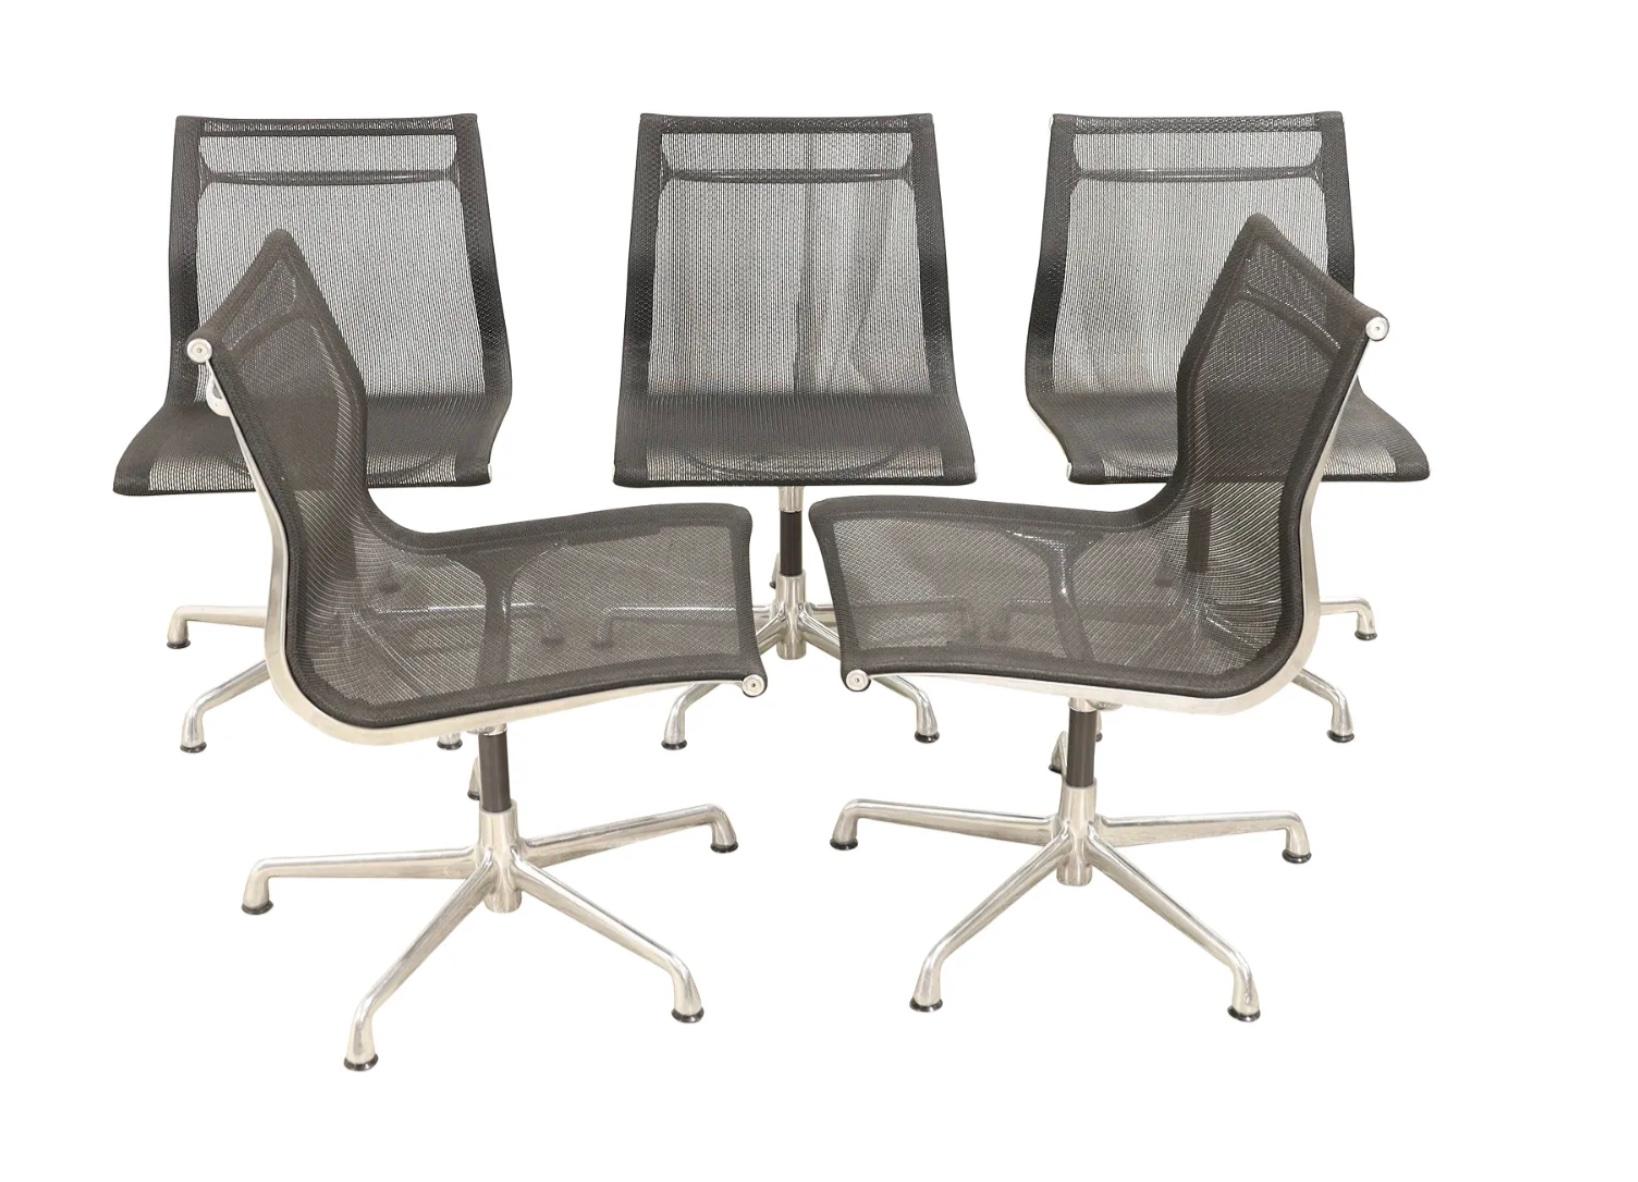 Modern Herman Miller Eames Aluminum Group side office chair in Black Mesh. These chairs have no arms / no casters / no height adjustment, but These chairs do swivel. Labeled under frame. Like New - Pre owned. Dated 2008. Original Retail Price was